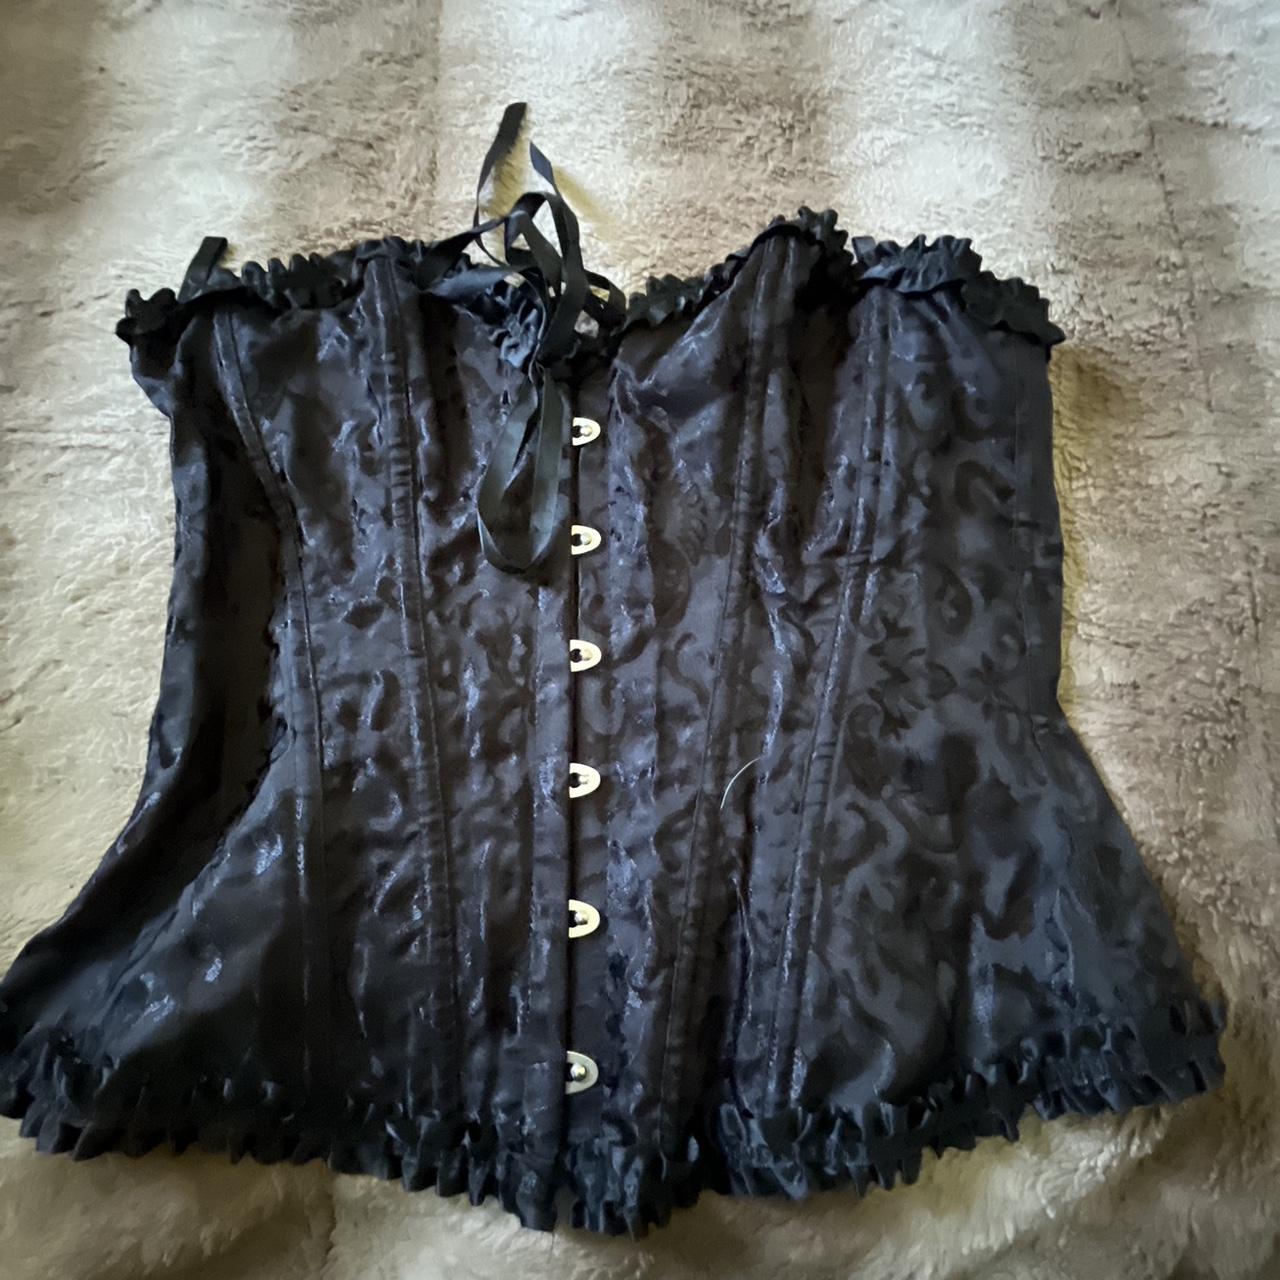 Black deadstock the limited top with a corset tie up - Depop